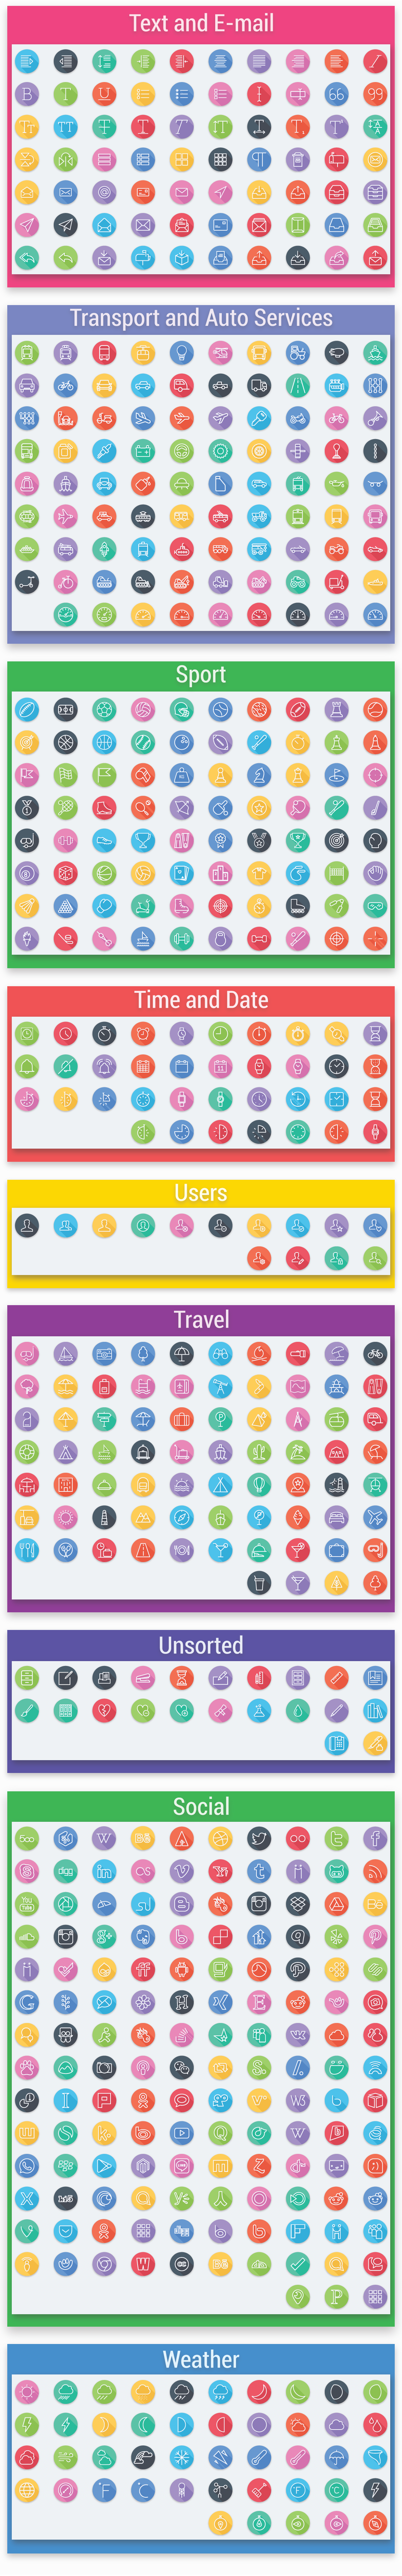 flat icons line icons outline icons design ios icons android icons free icons web icons app icons colorful FLAT LINE ICONS icons set vector infographic